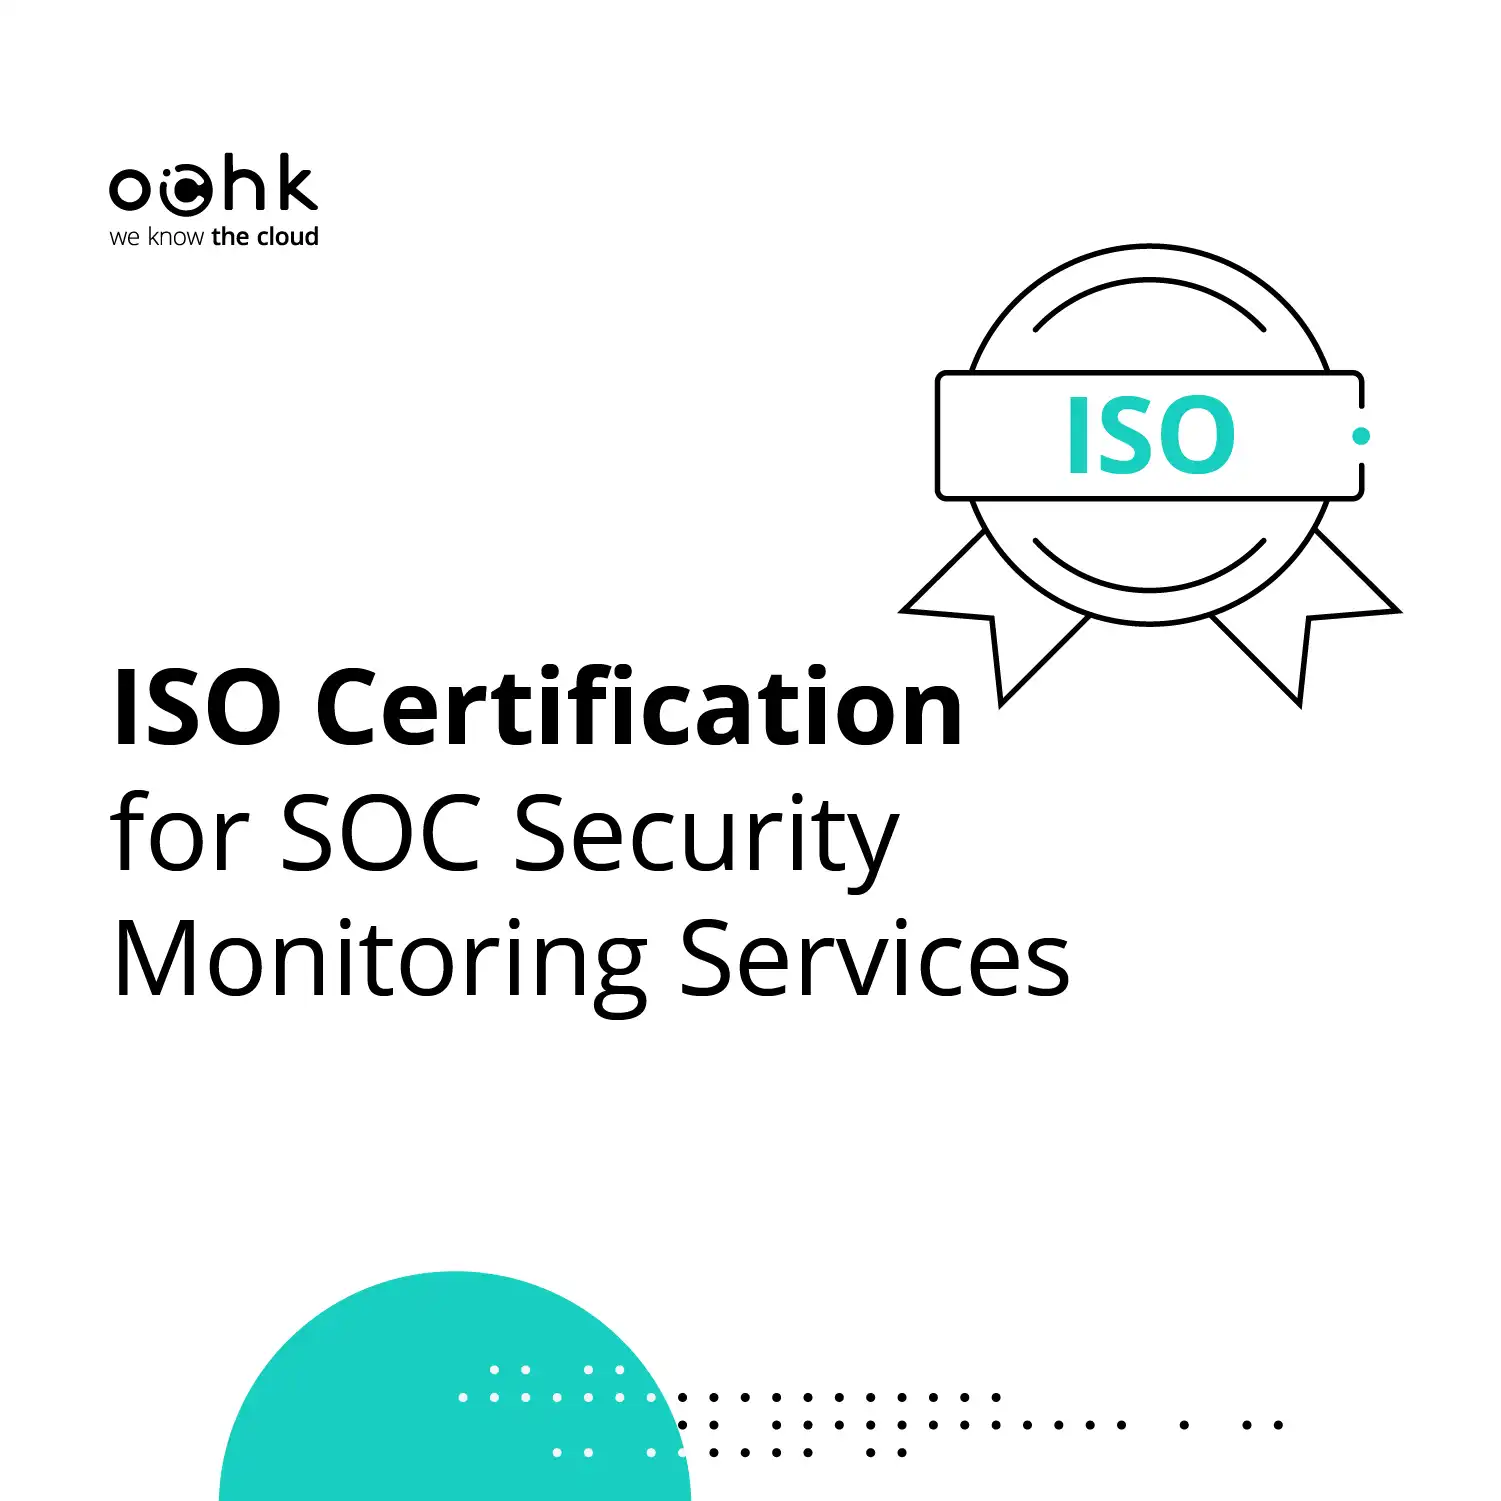 OChK Achieves ISO Certification for SOC Security Monitoring Services